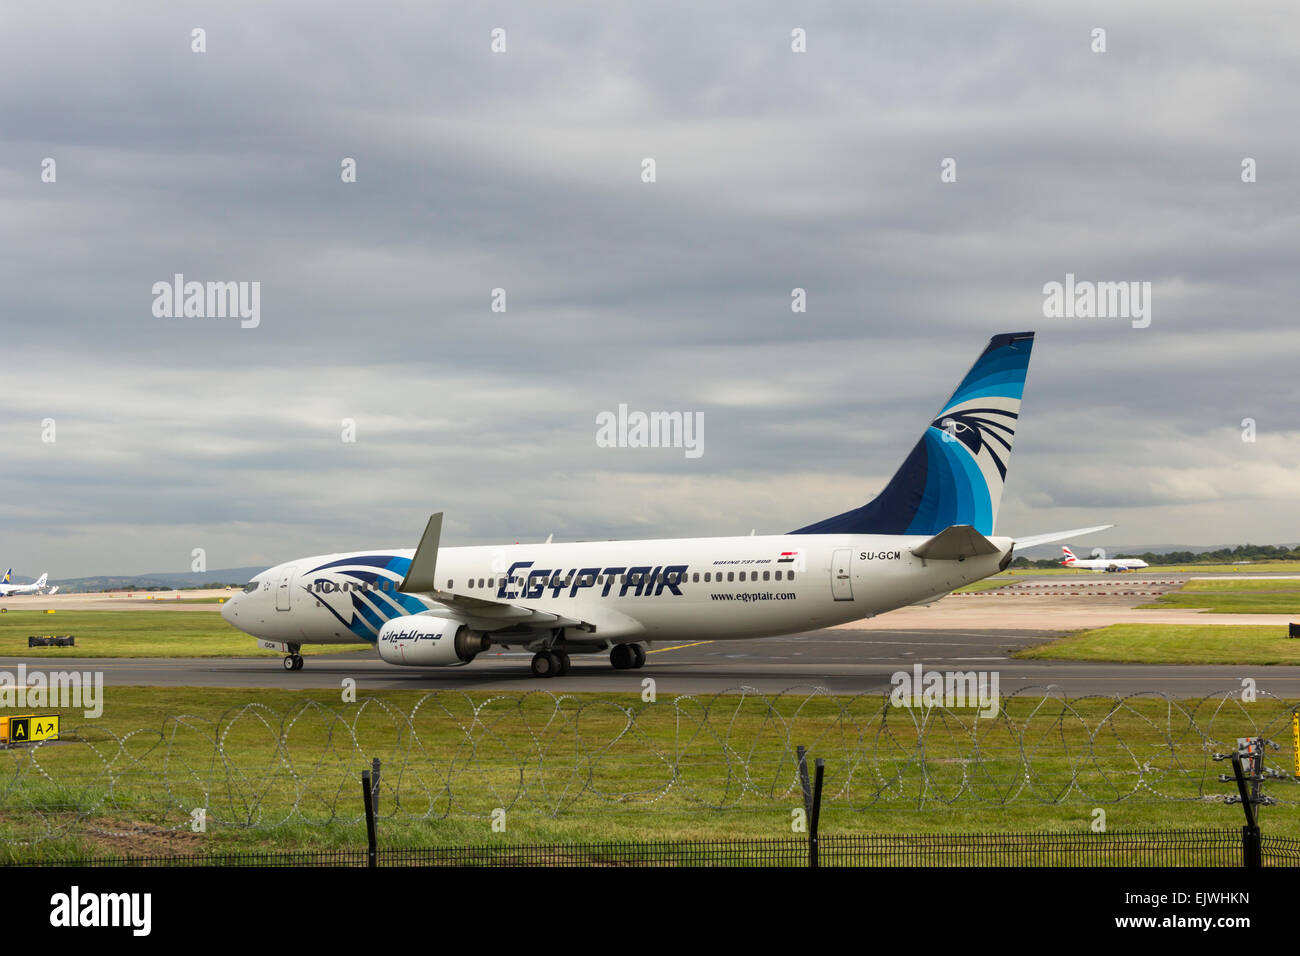 Egyptair branded Boeing 737-800 aircraft taxiing towards the take-off runway at Manchester airport. Stock Photo